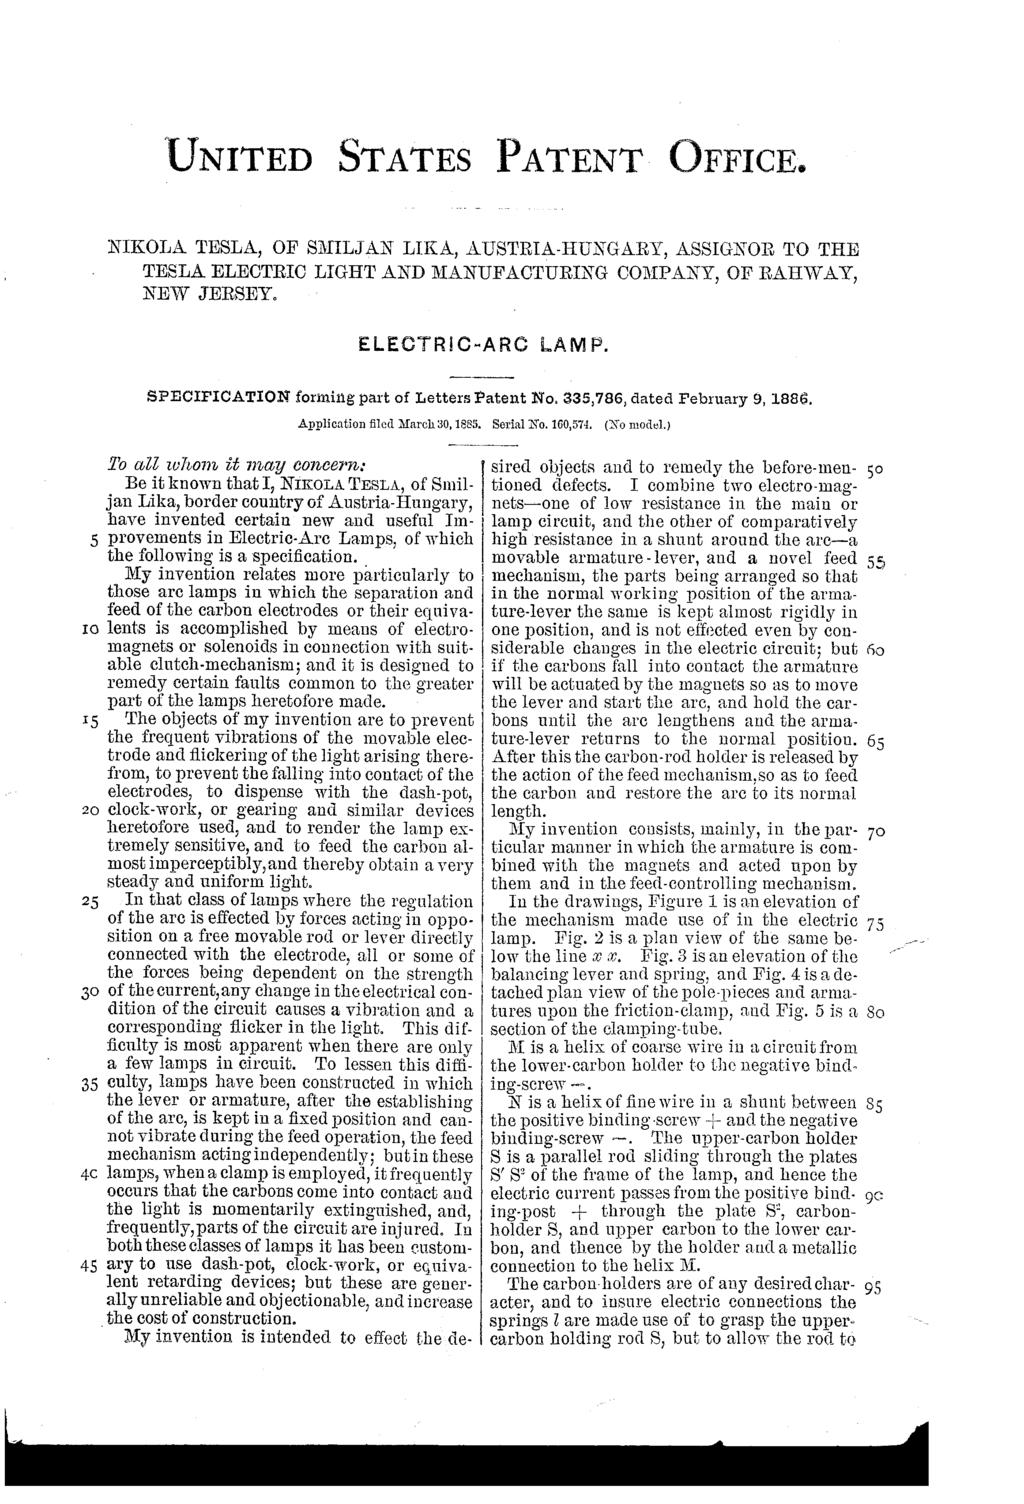 5 IC) 25 35 45 UNITED STATES PATENT OFFICE. NIKOLATESLA, OF SMILJAN LIKA, AUSTRIA-HUNGARY, ASSIGNOR TO THE TESLAELECTRIC LIGHT AND MANUFACTURING COMPANY, OF RAHWAY, NEWJERSEY. ELECRC-ARC AMP.